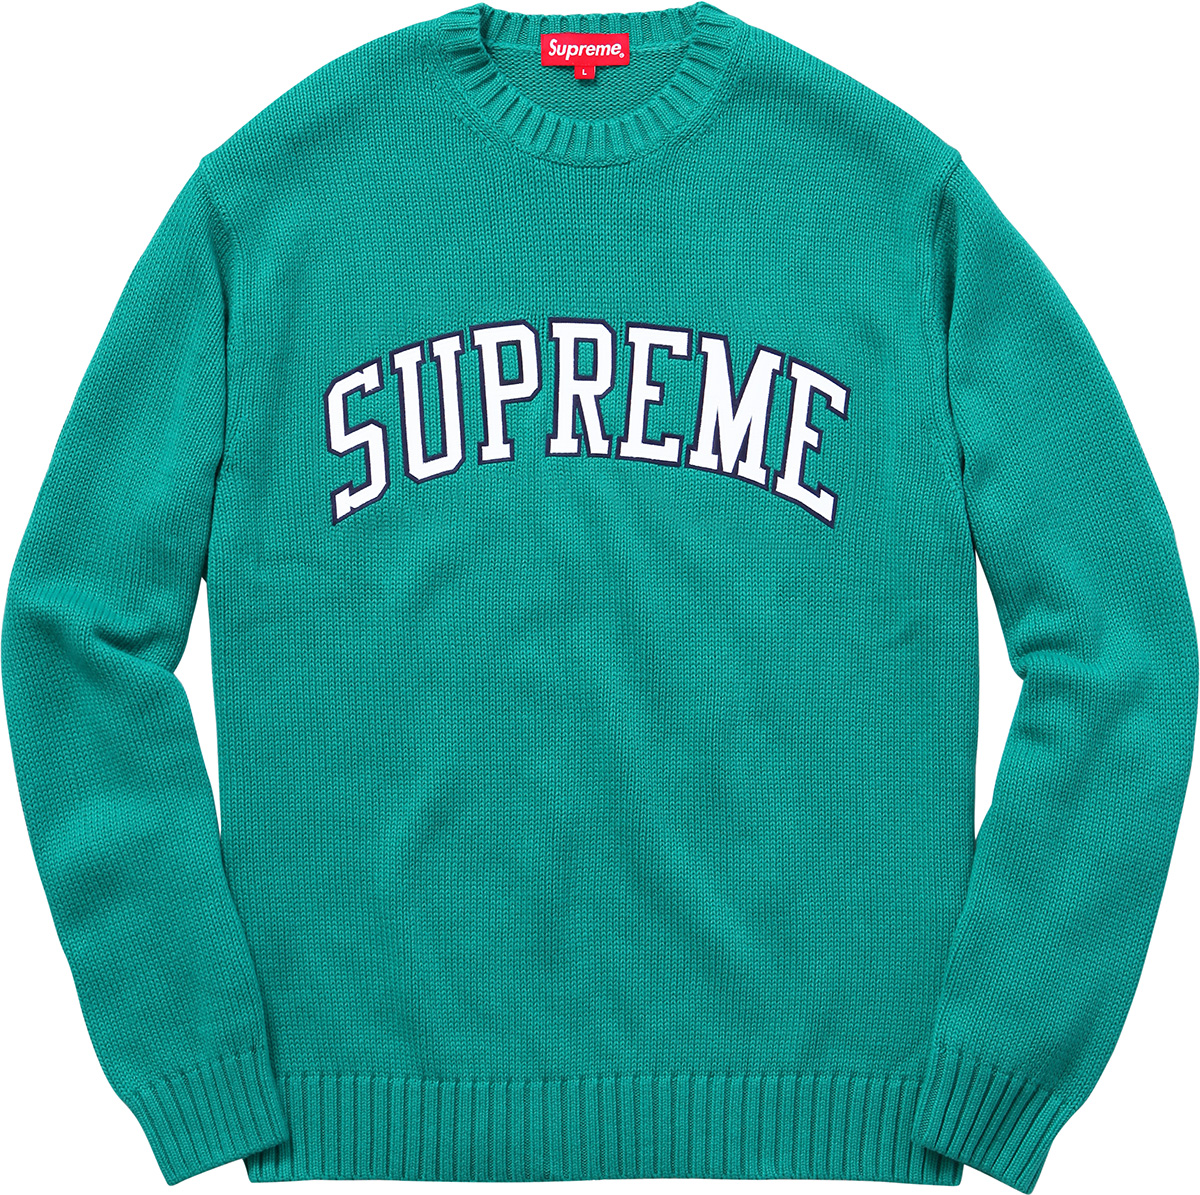 Supreme Tackle Twill Teal - SS16 Men's - US